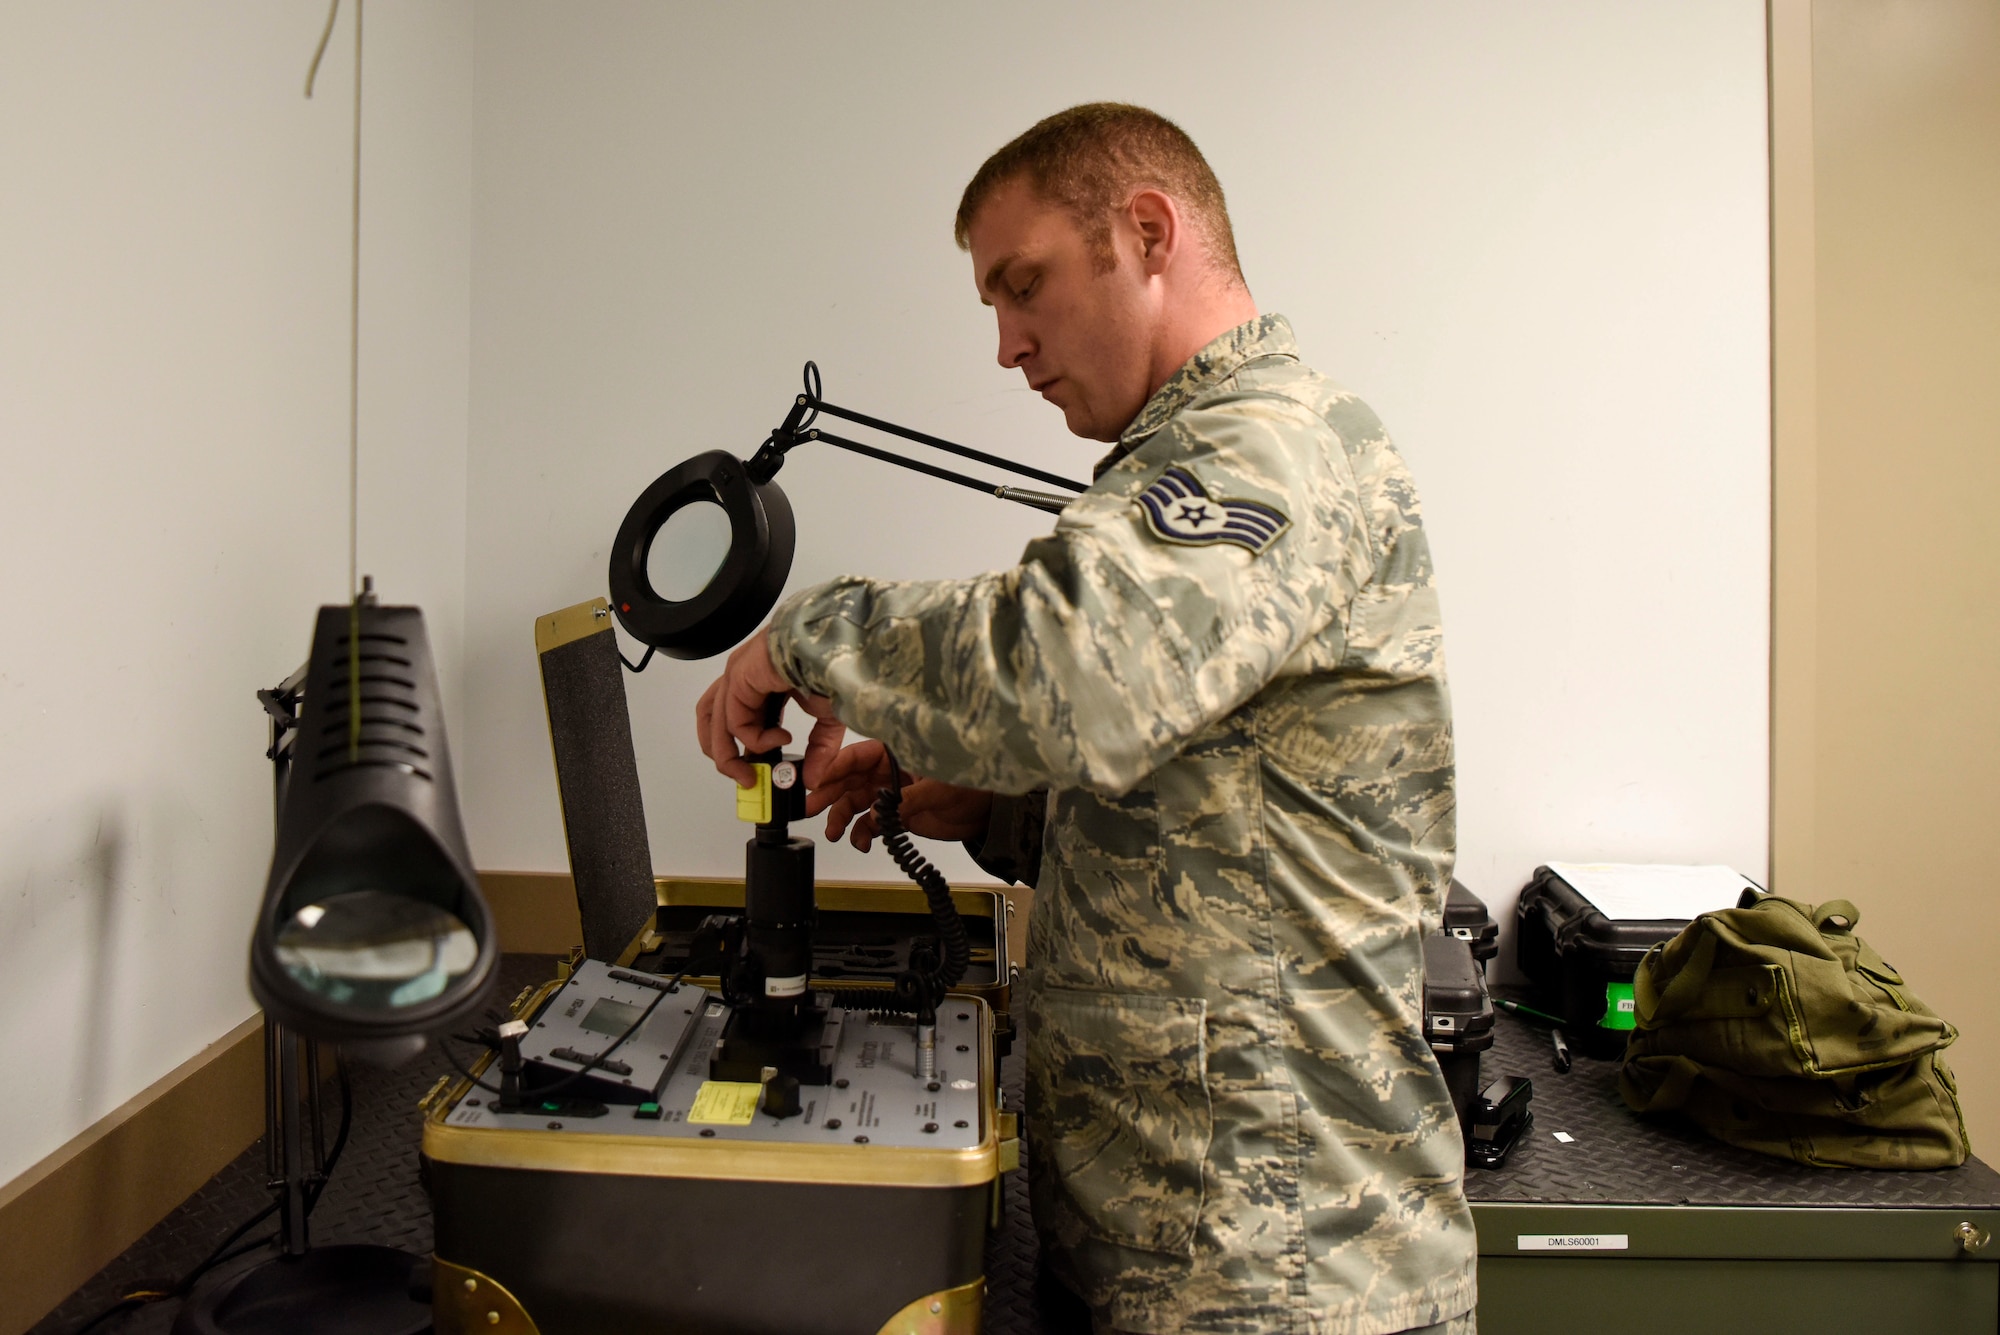 Staff Sgt. Chris Sharlow, 436th Operations Support Squadron aircrew flight equipment craftsman, runs tests on night vision goggles May 23, 2018, at Dover Air Force Base, Del. Aircrews use NVGs to significantly improve visibility in low light condition missions. (U.S Air Force photo by Airman 1st Class Zoe M. Wockenfuss)